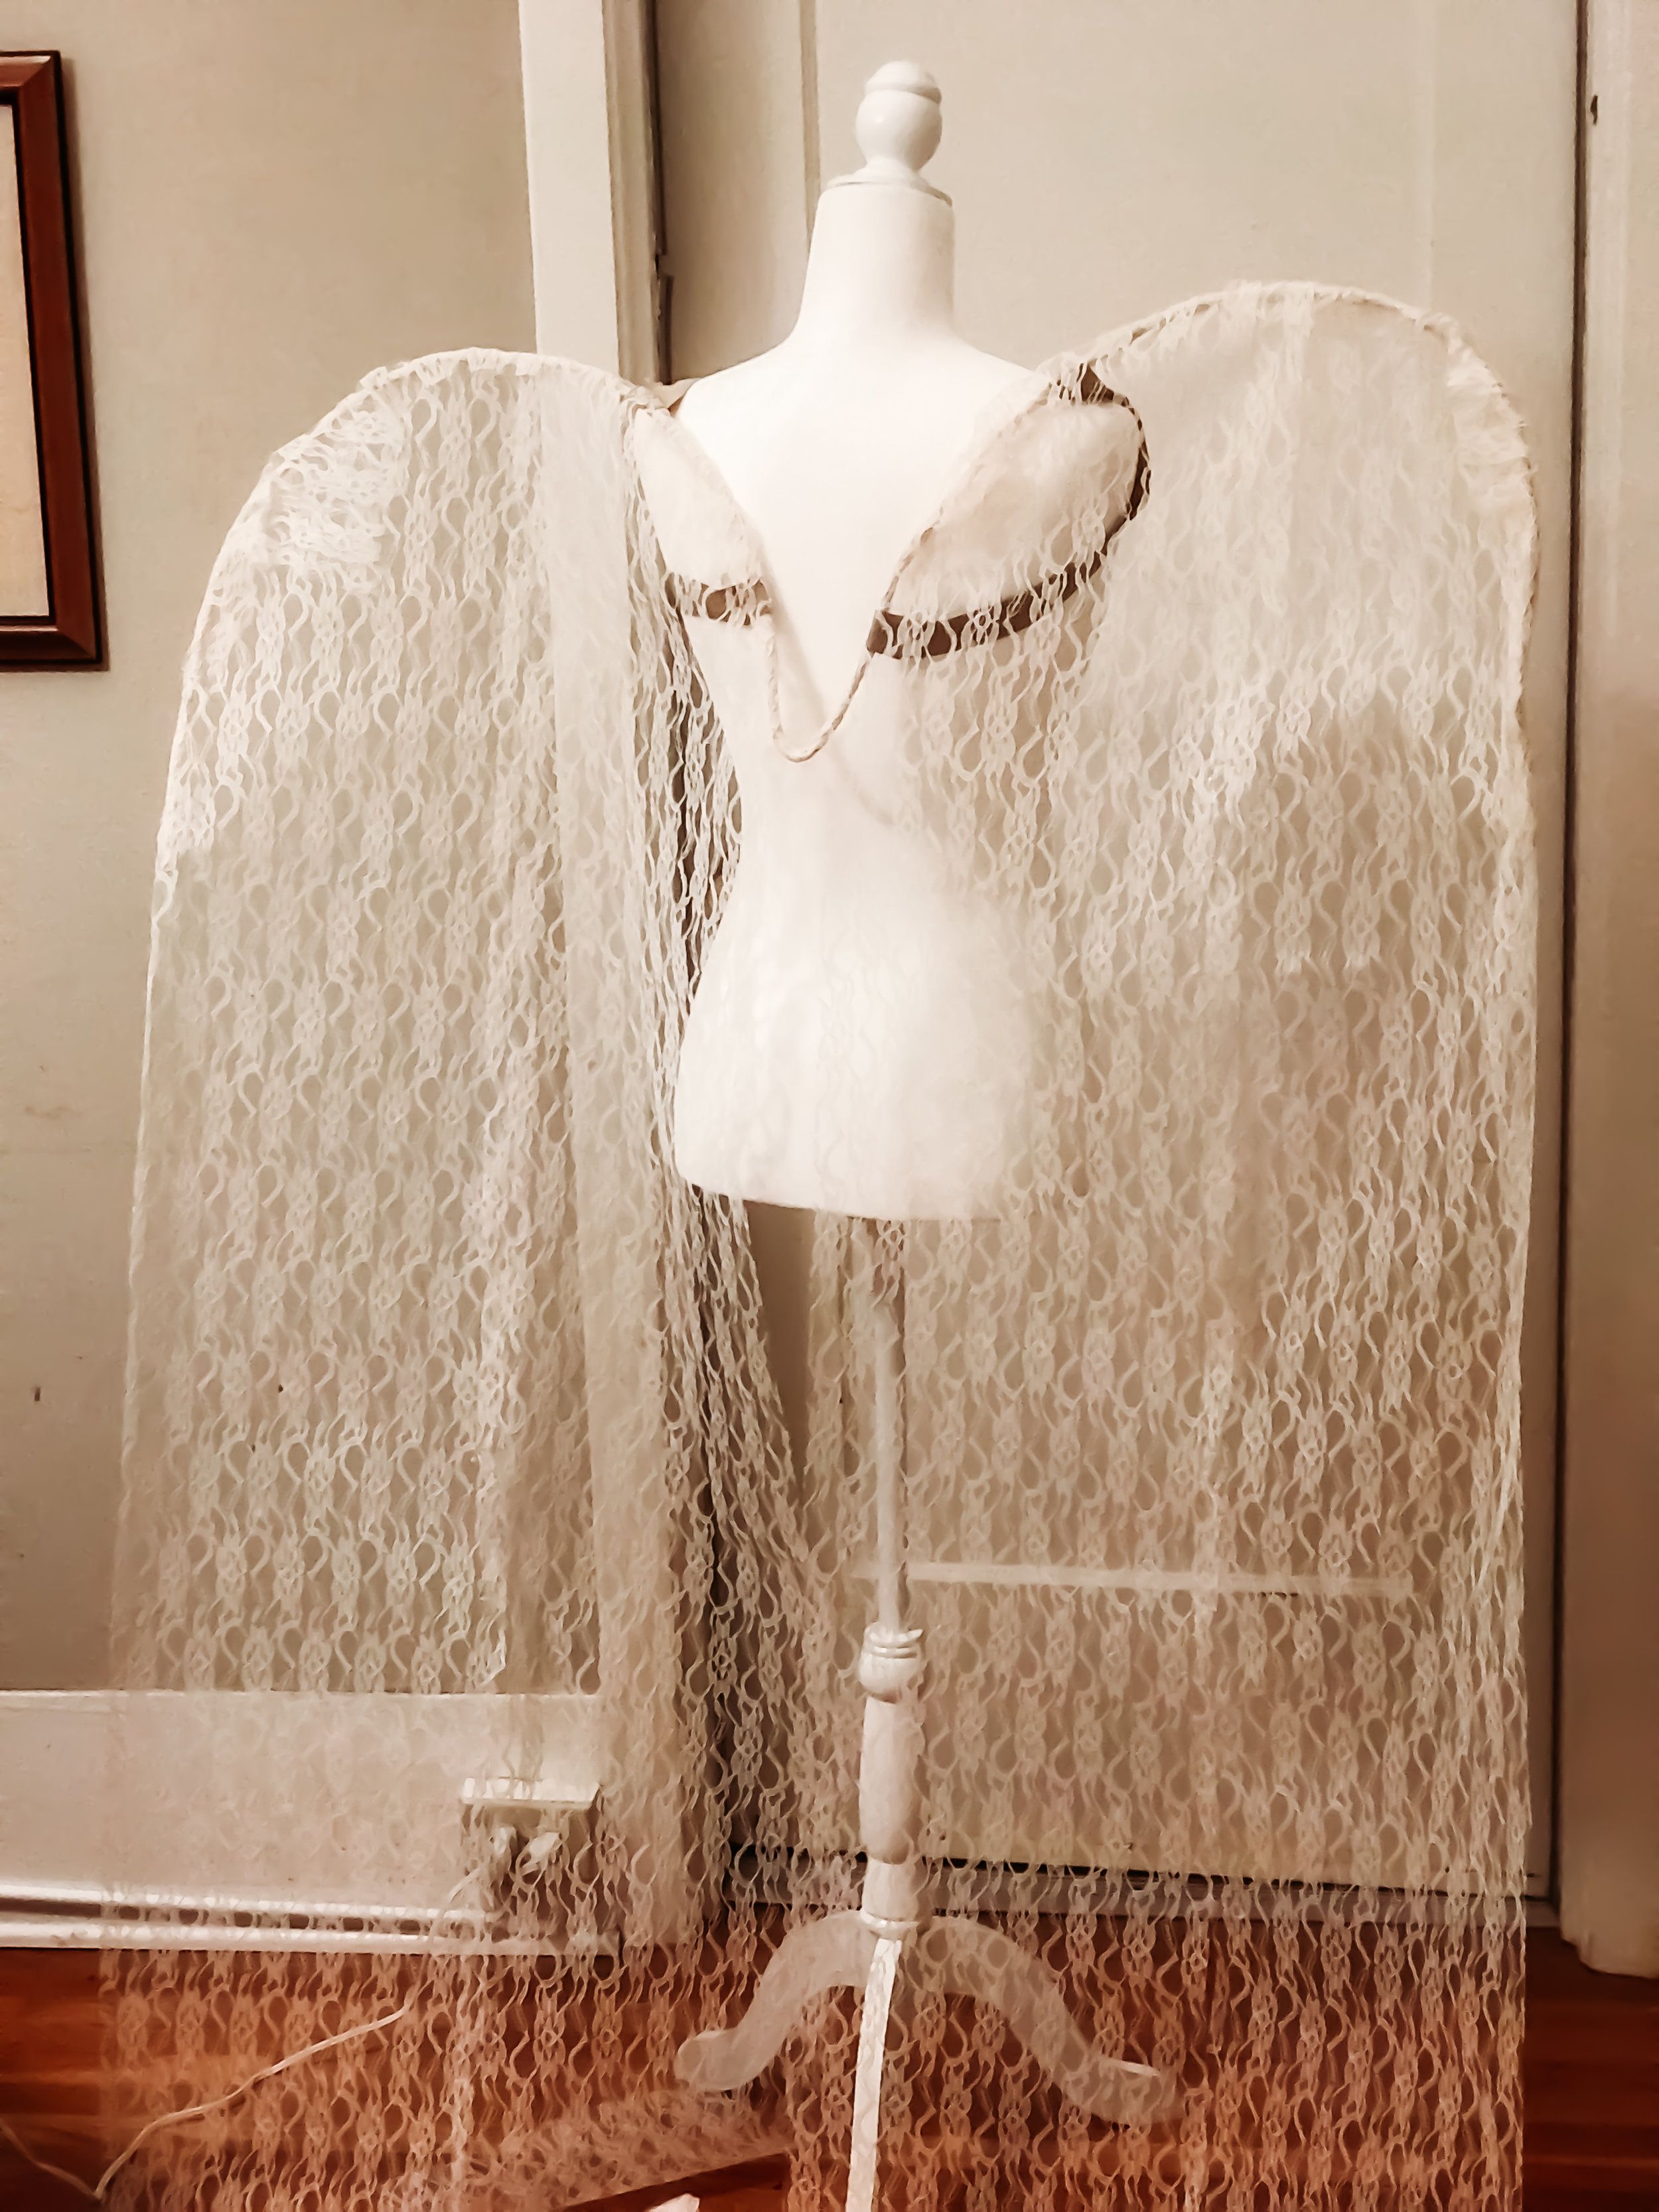 How to Make Angel Wings for Boudoir Photo Shoots